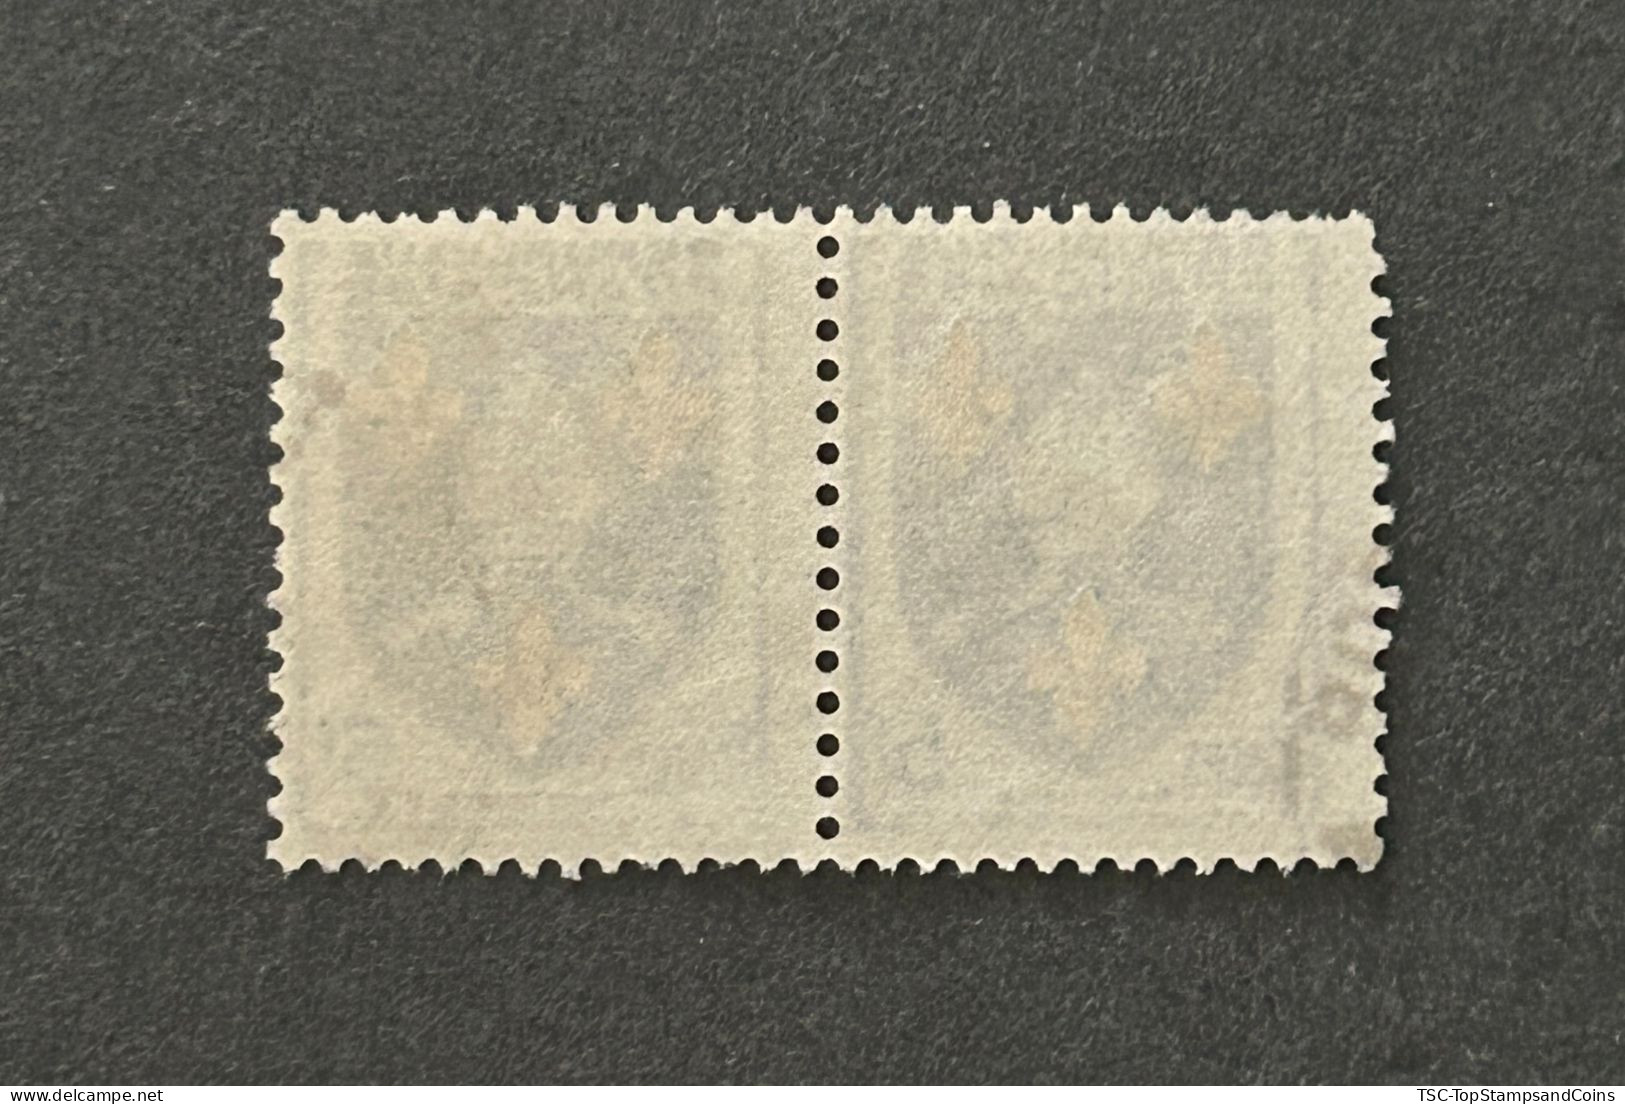 FRA1005Ux2h3 - Armoiries De Provinces (VII) - Saintonge - Pair Of 5 F Used Stamps - 1954 - France YT 1005 - 1941-66 Coat Of Arms And Heraldry